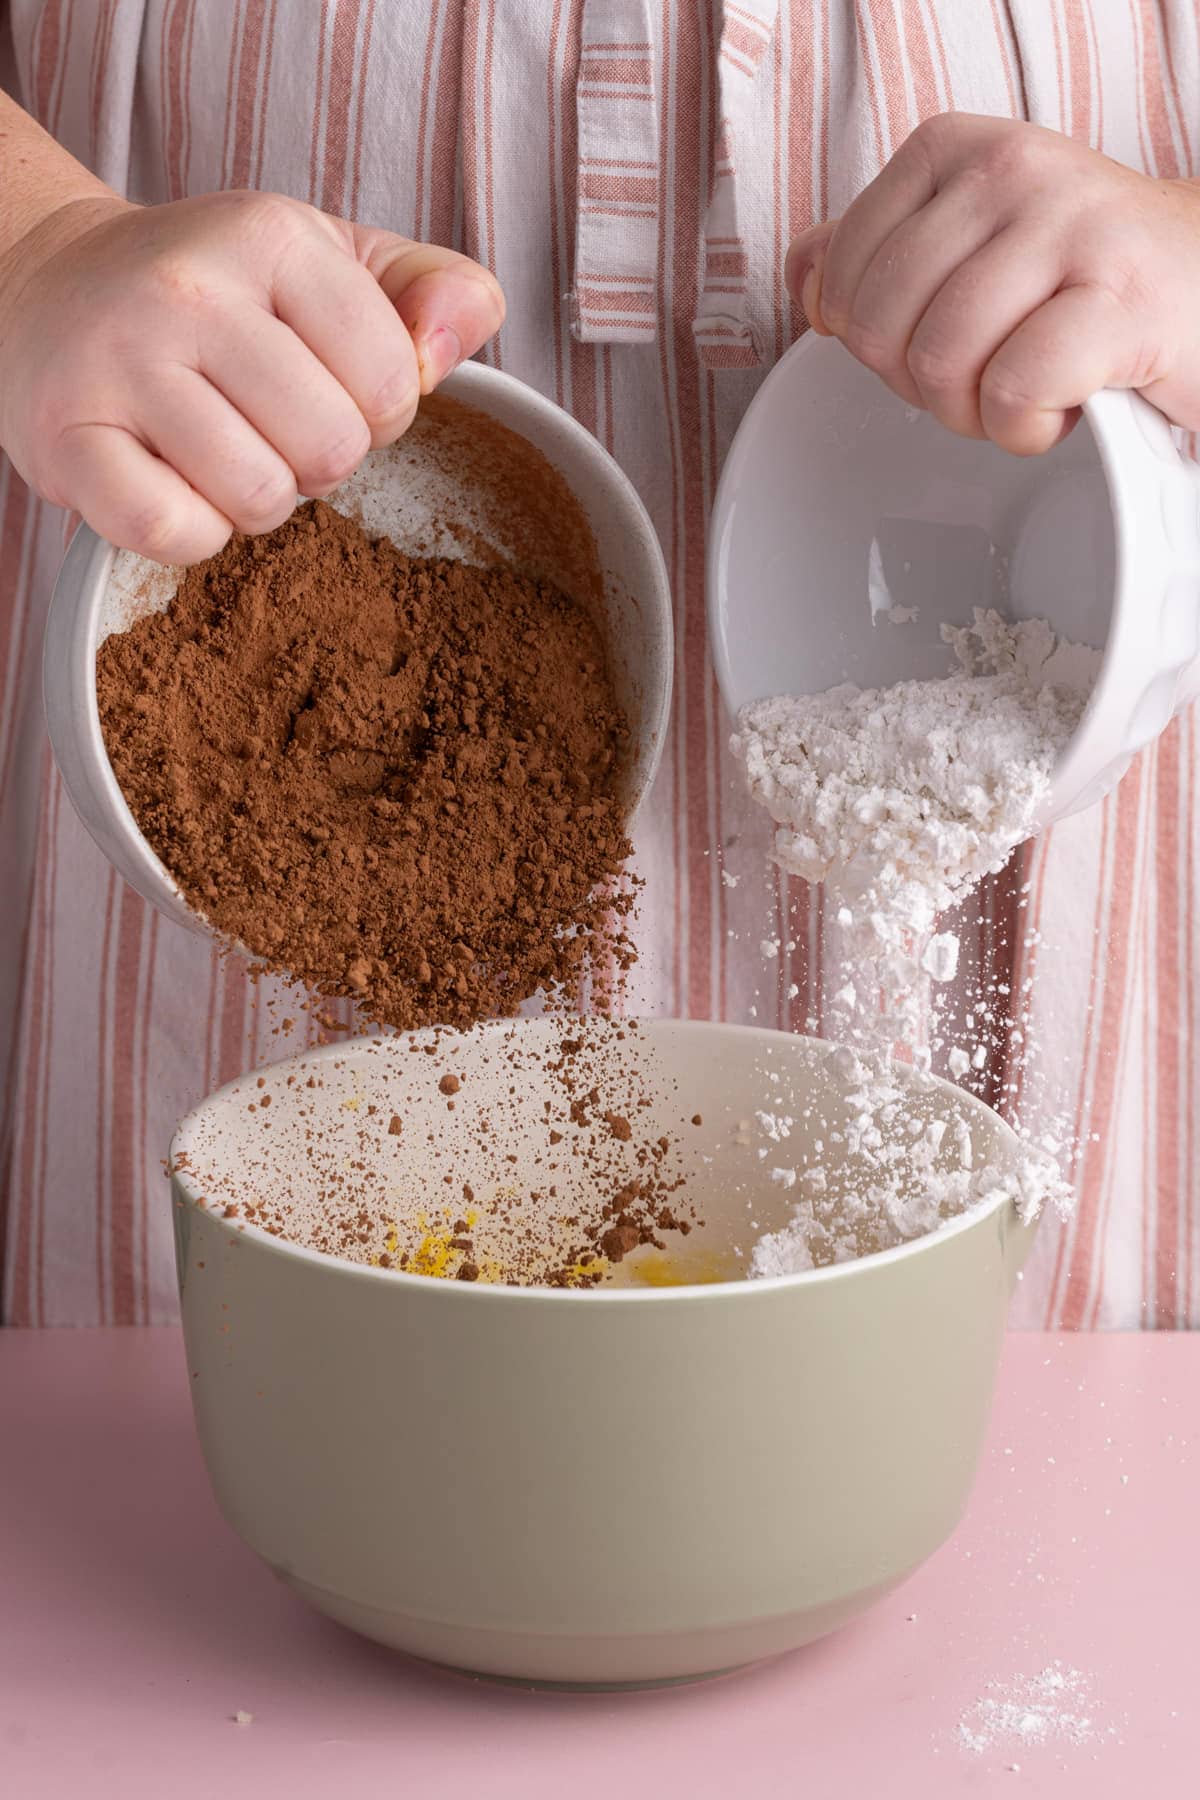 Adding cocoa powder and flour to a mixing bowl with wet ingredients.